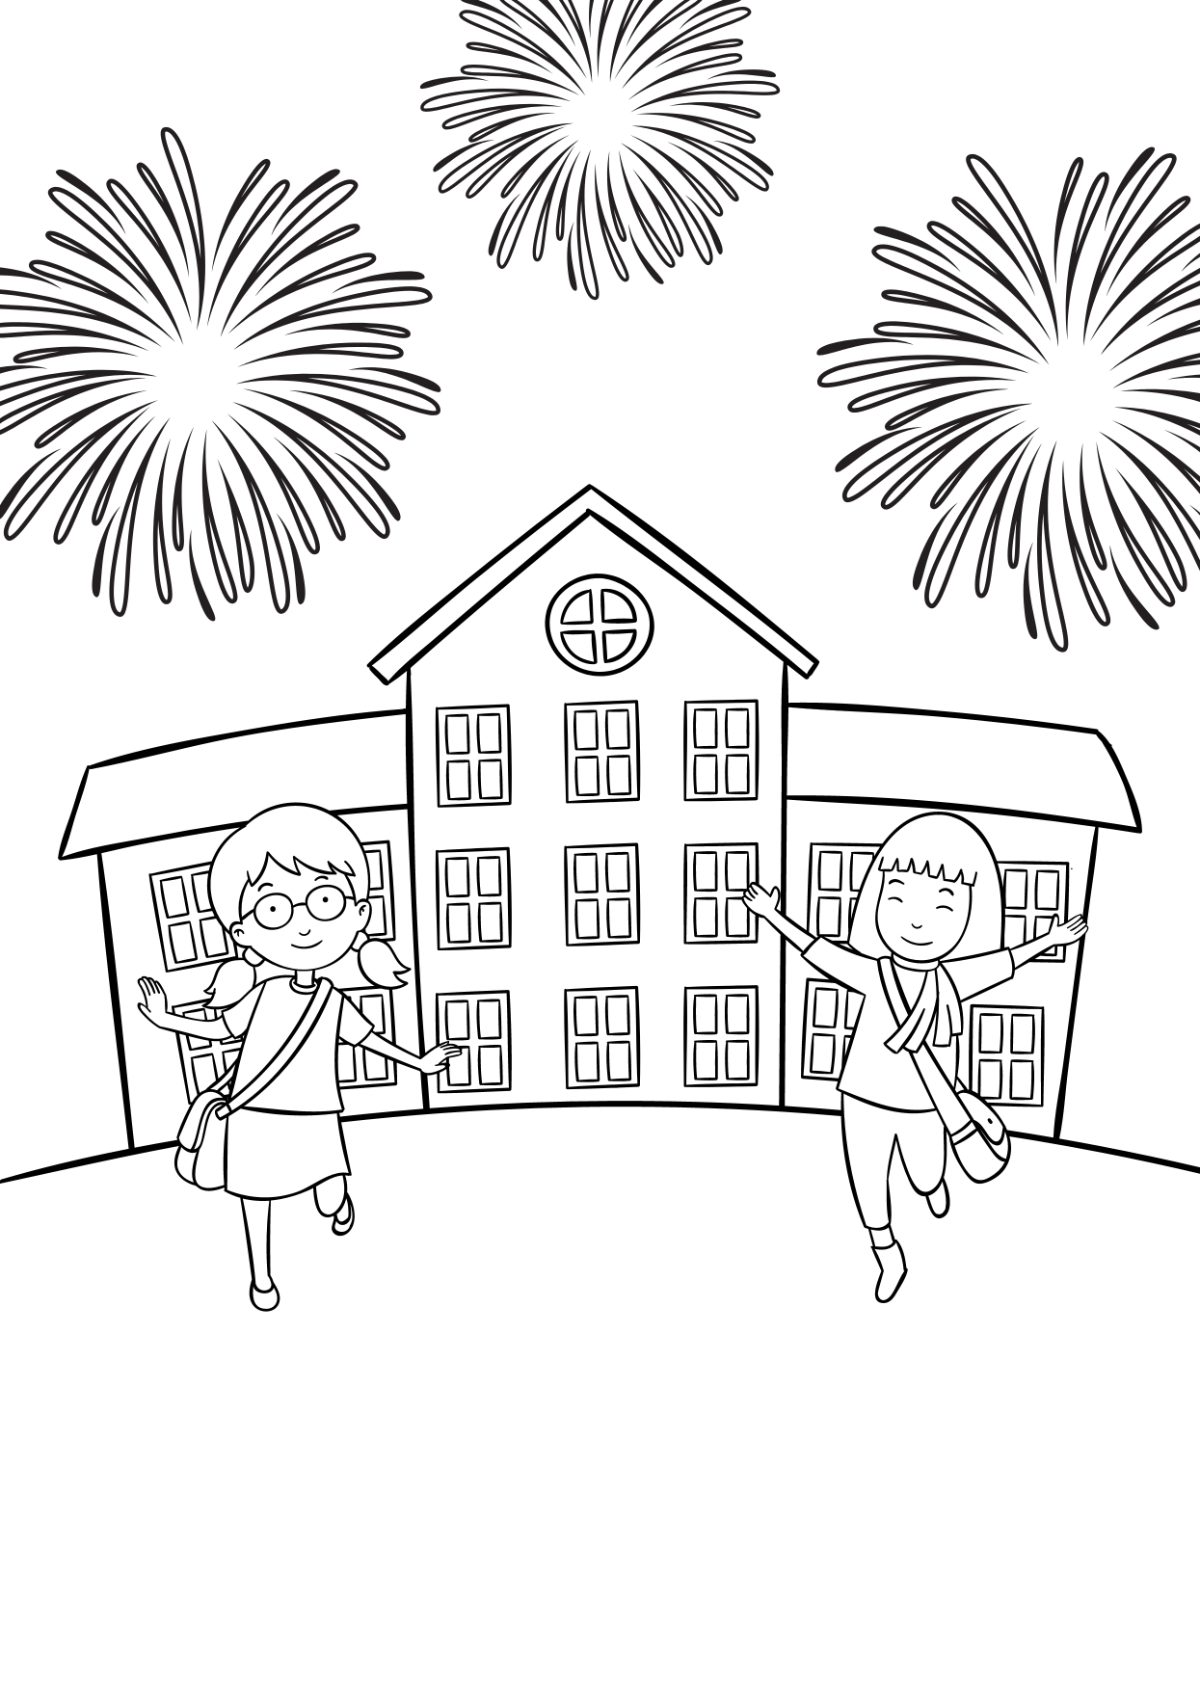 New Year Drawing For School Template